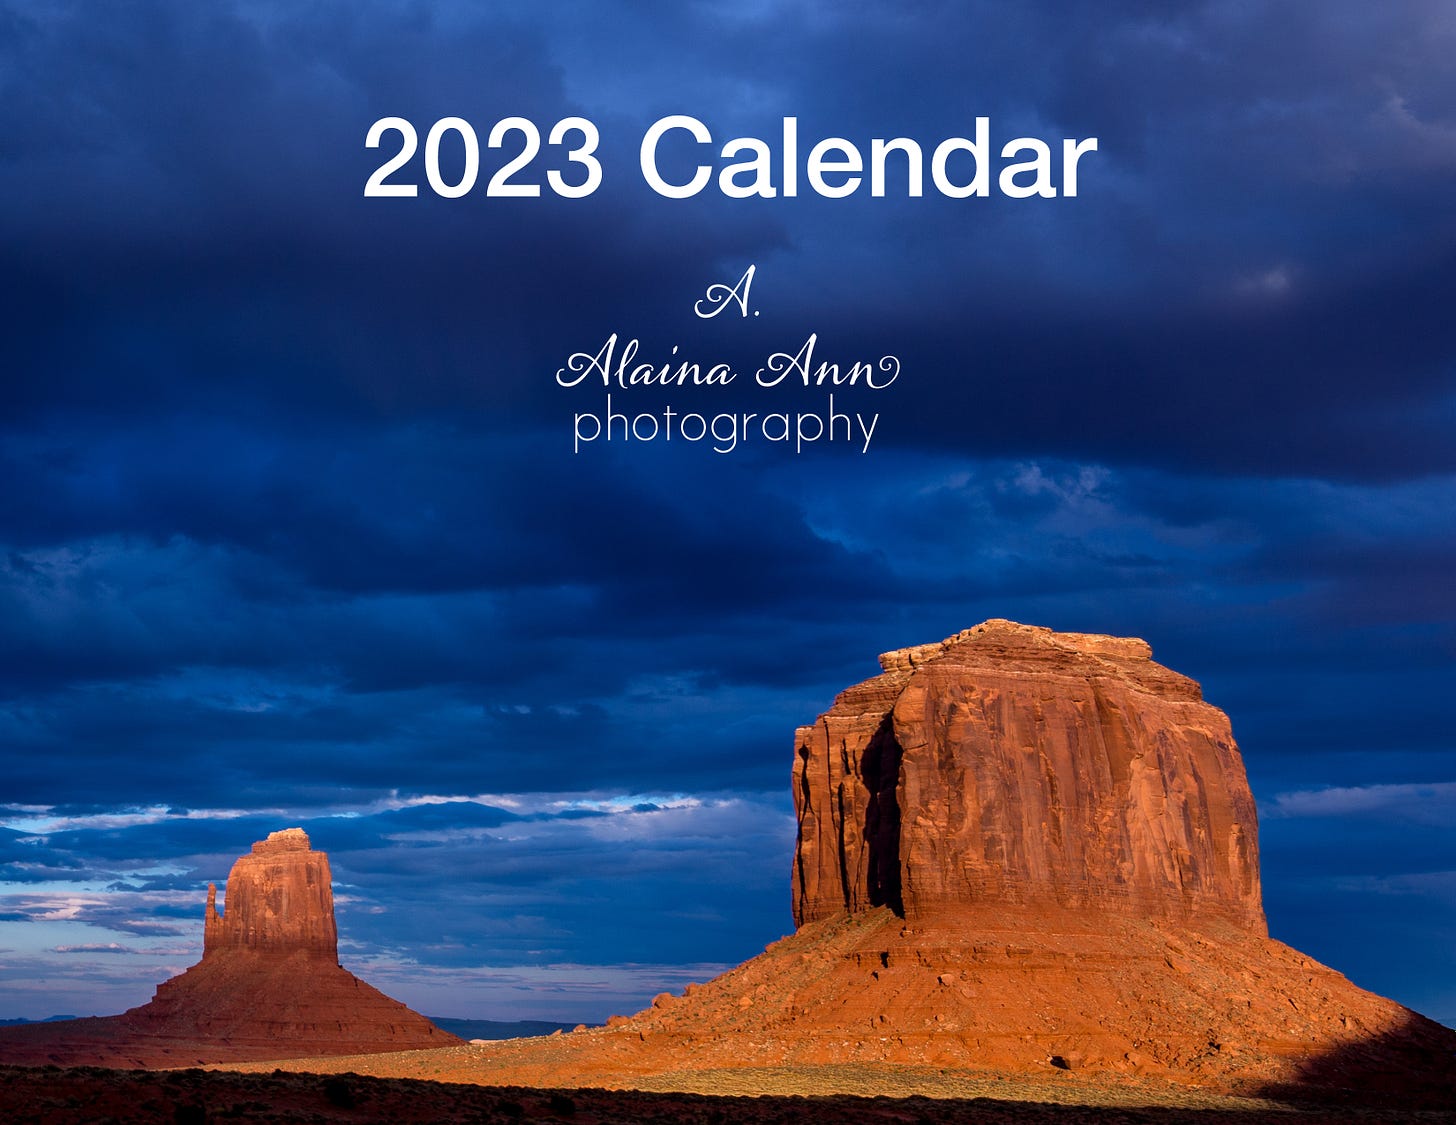 Cover of a 2023 calendar featuring sunlit red rock buttes with blue clouds across the sky.